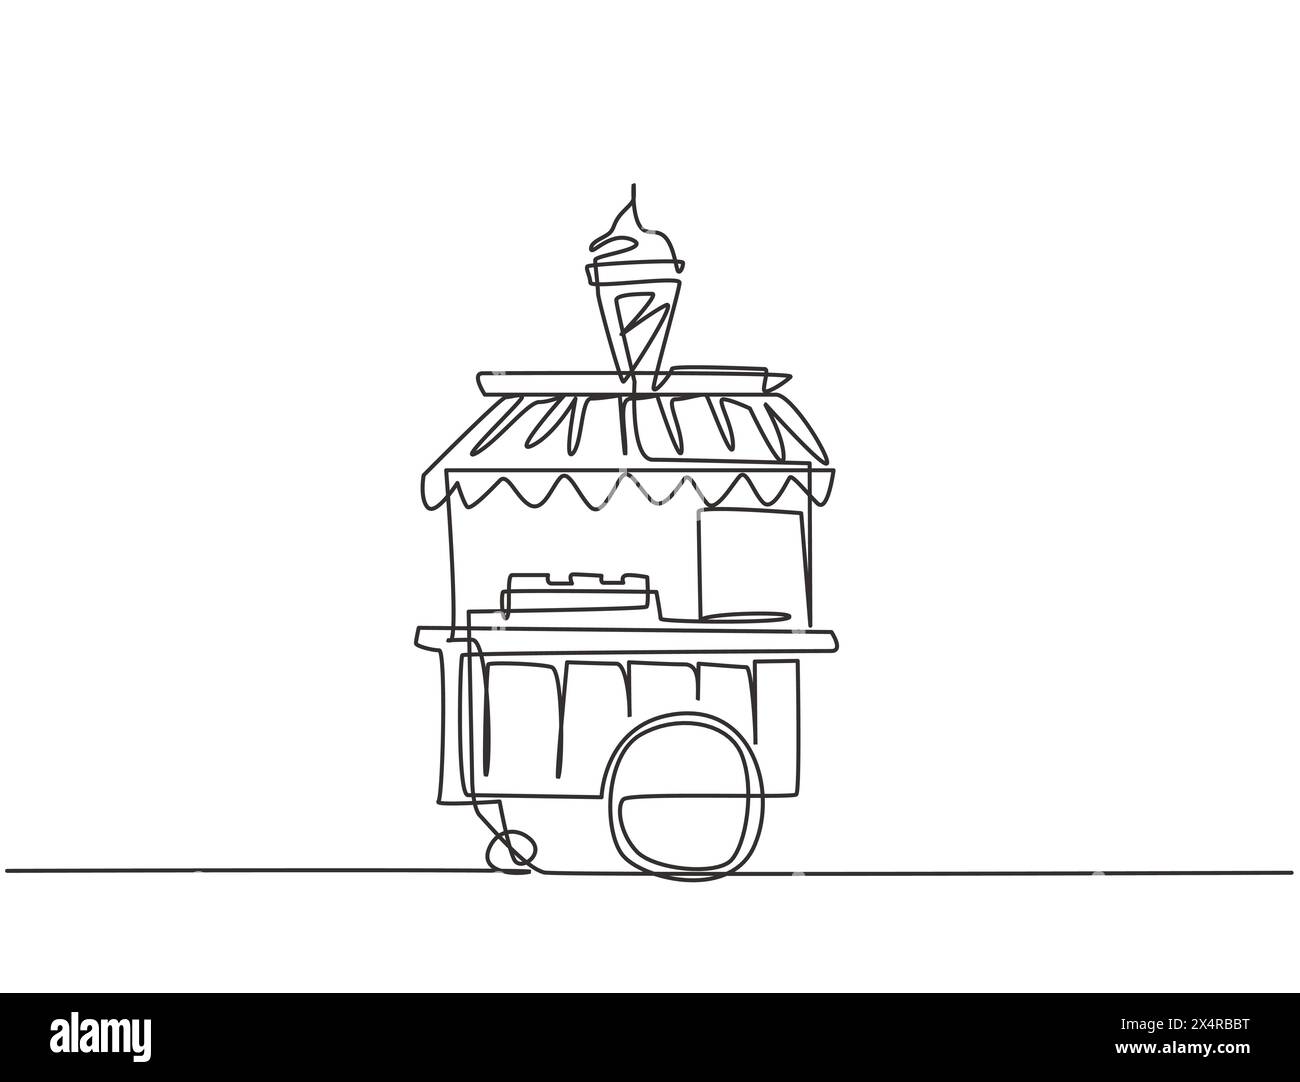 Single one line drawing of ice cream booth at amusement park using a two-wheeled cart with an ice cream logo. Sweet and very tasty food concept. Conti Stock Vector